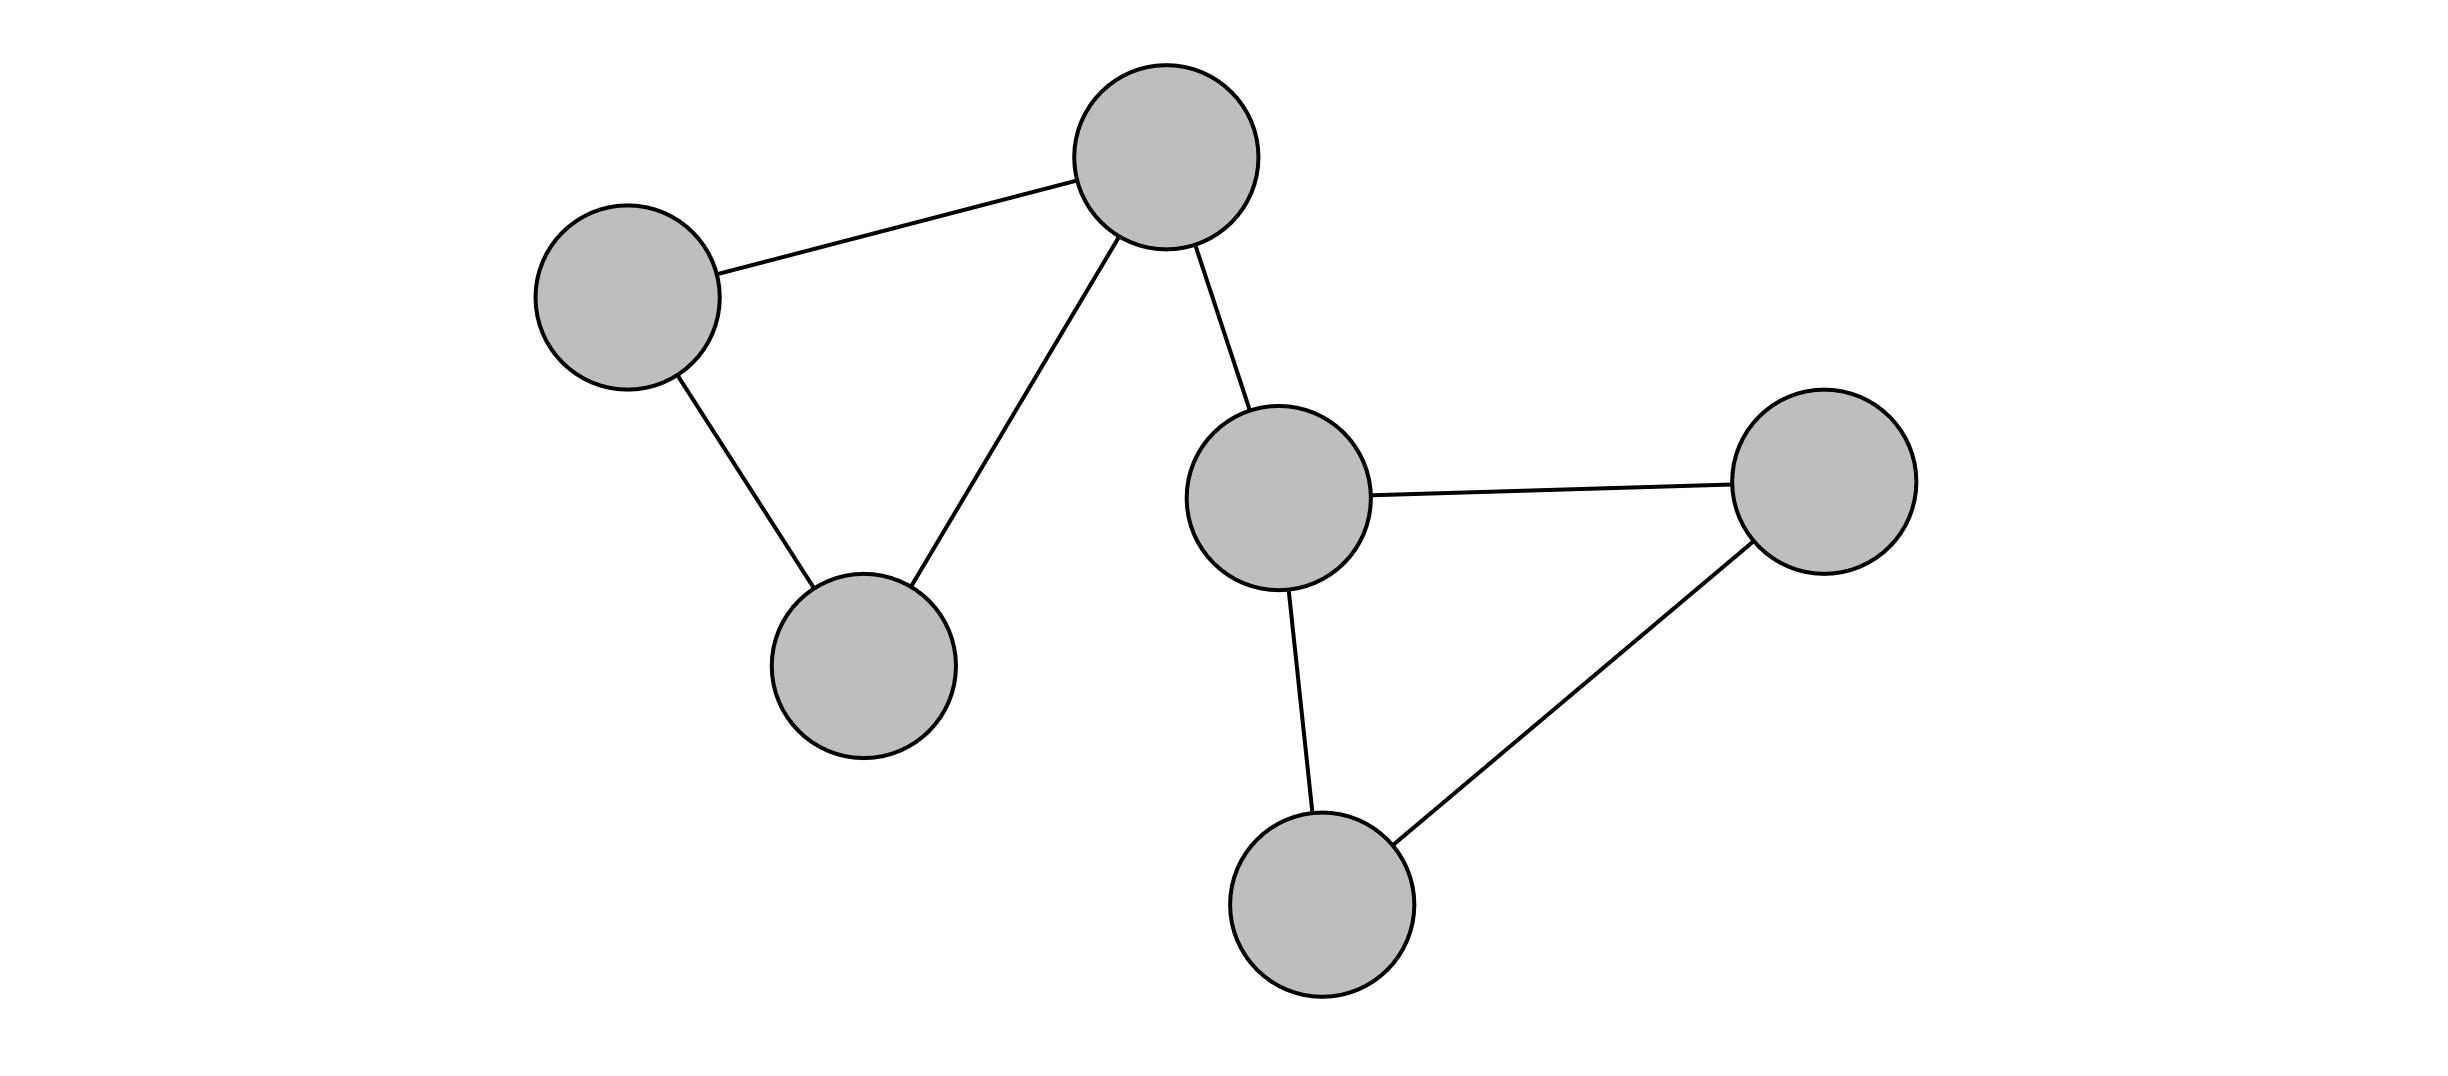 A simple undirected and unweighted graph containing six nodes and seven edges.